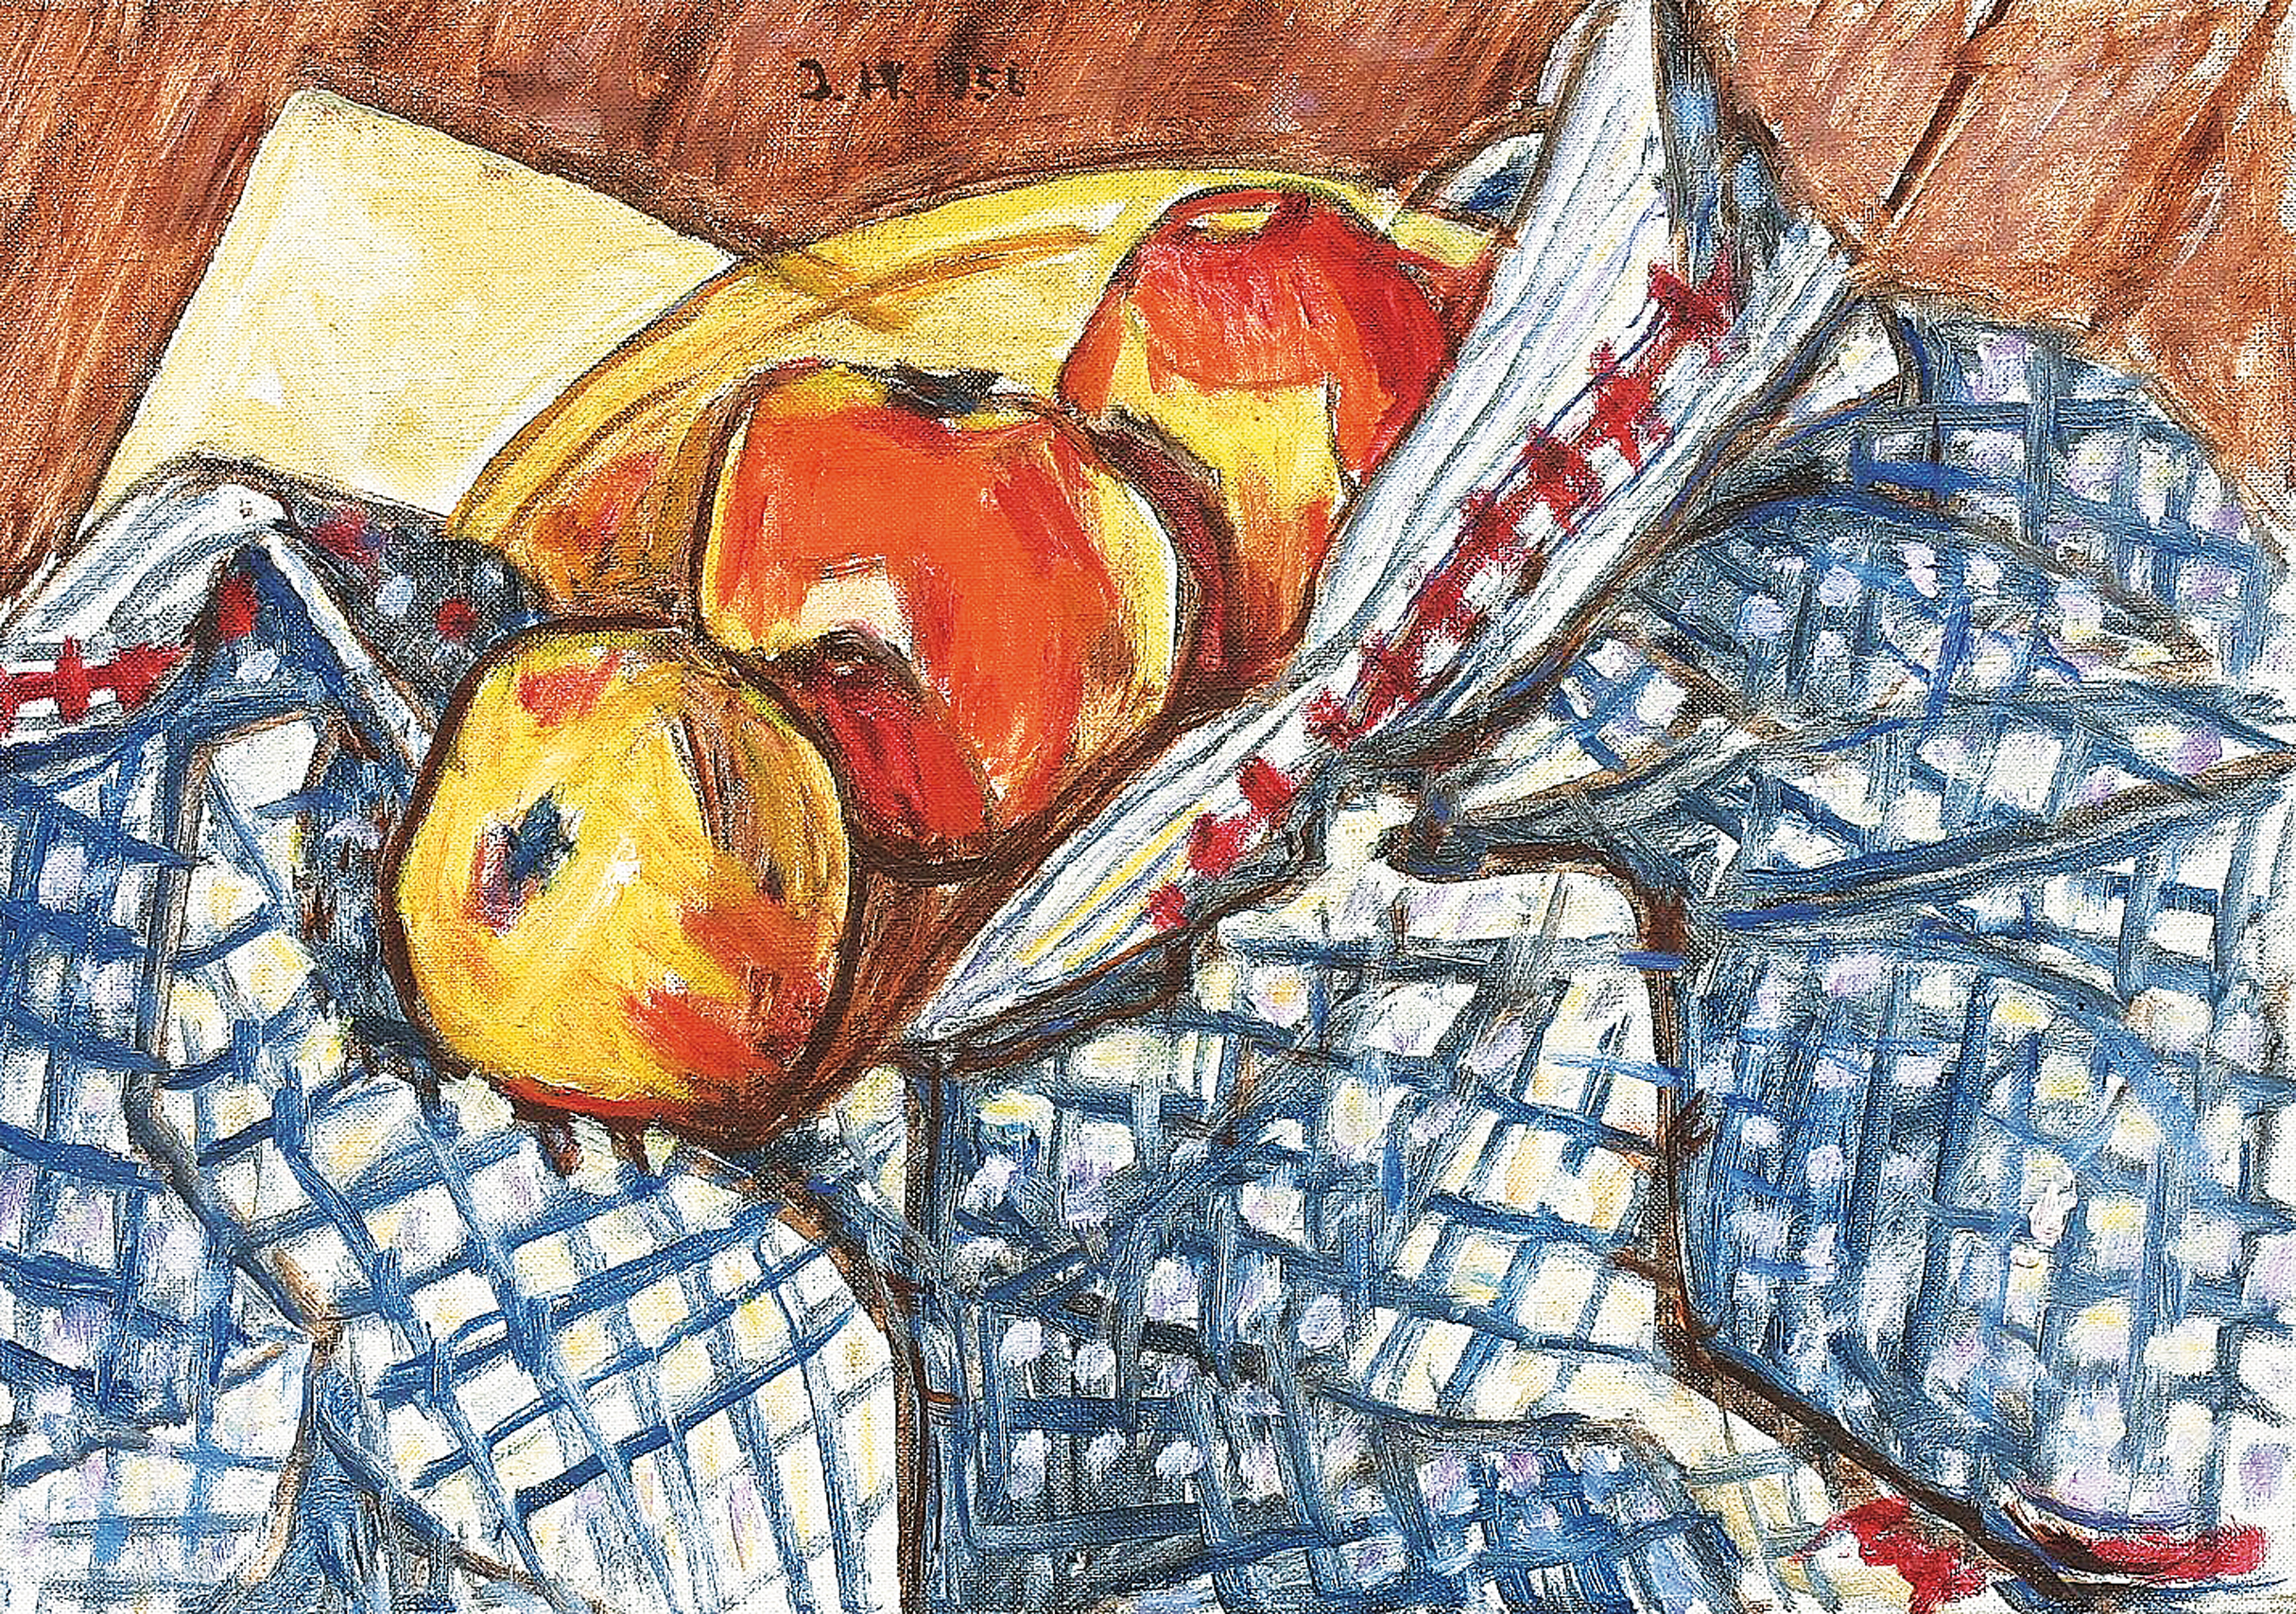 "Apples in a basket"